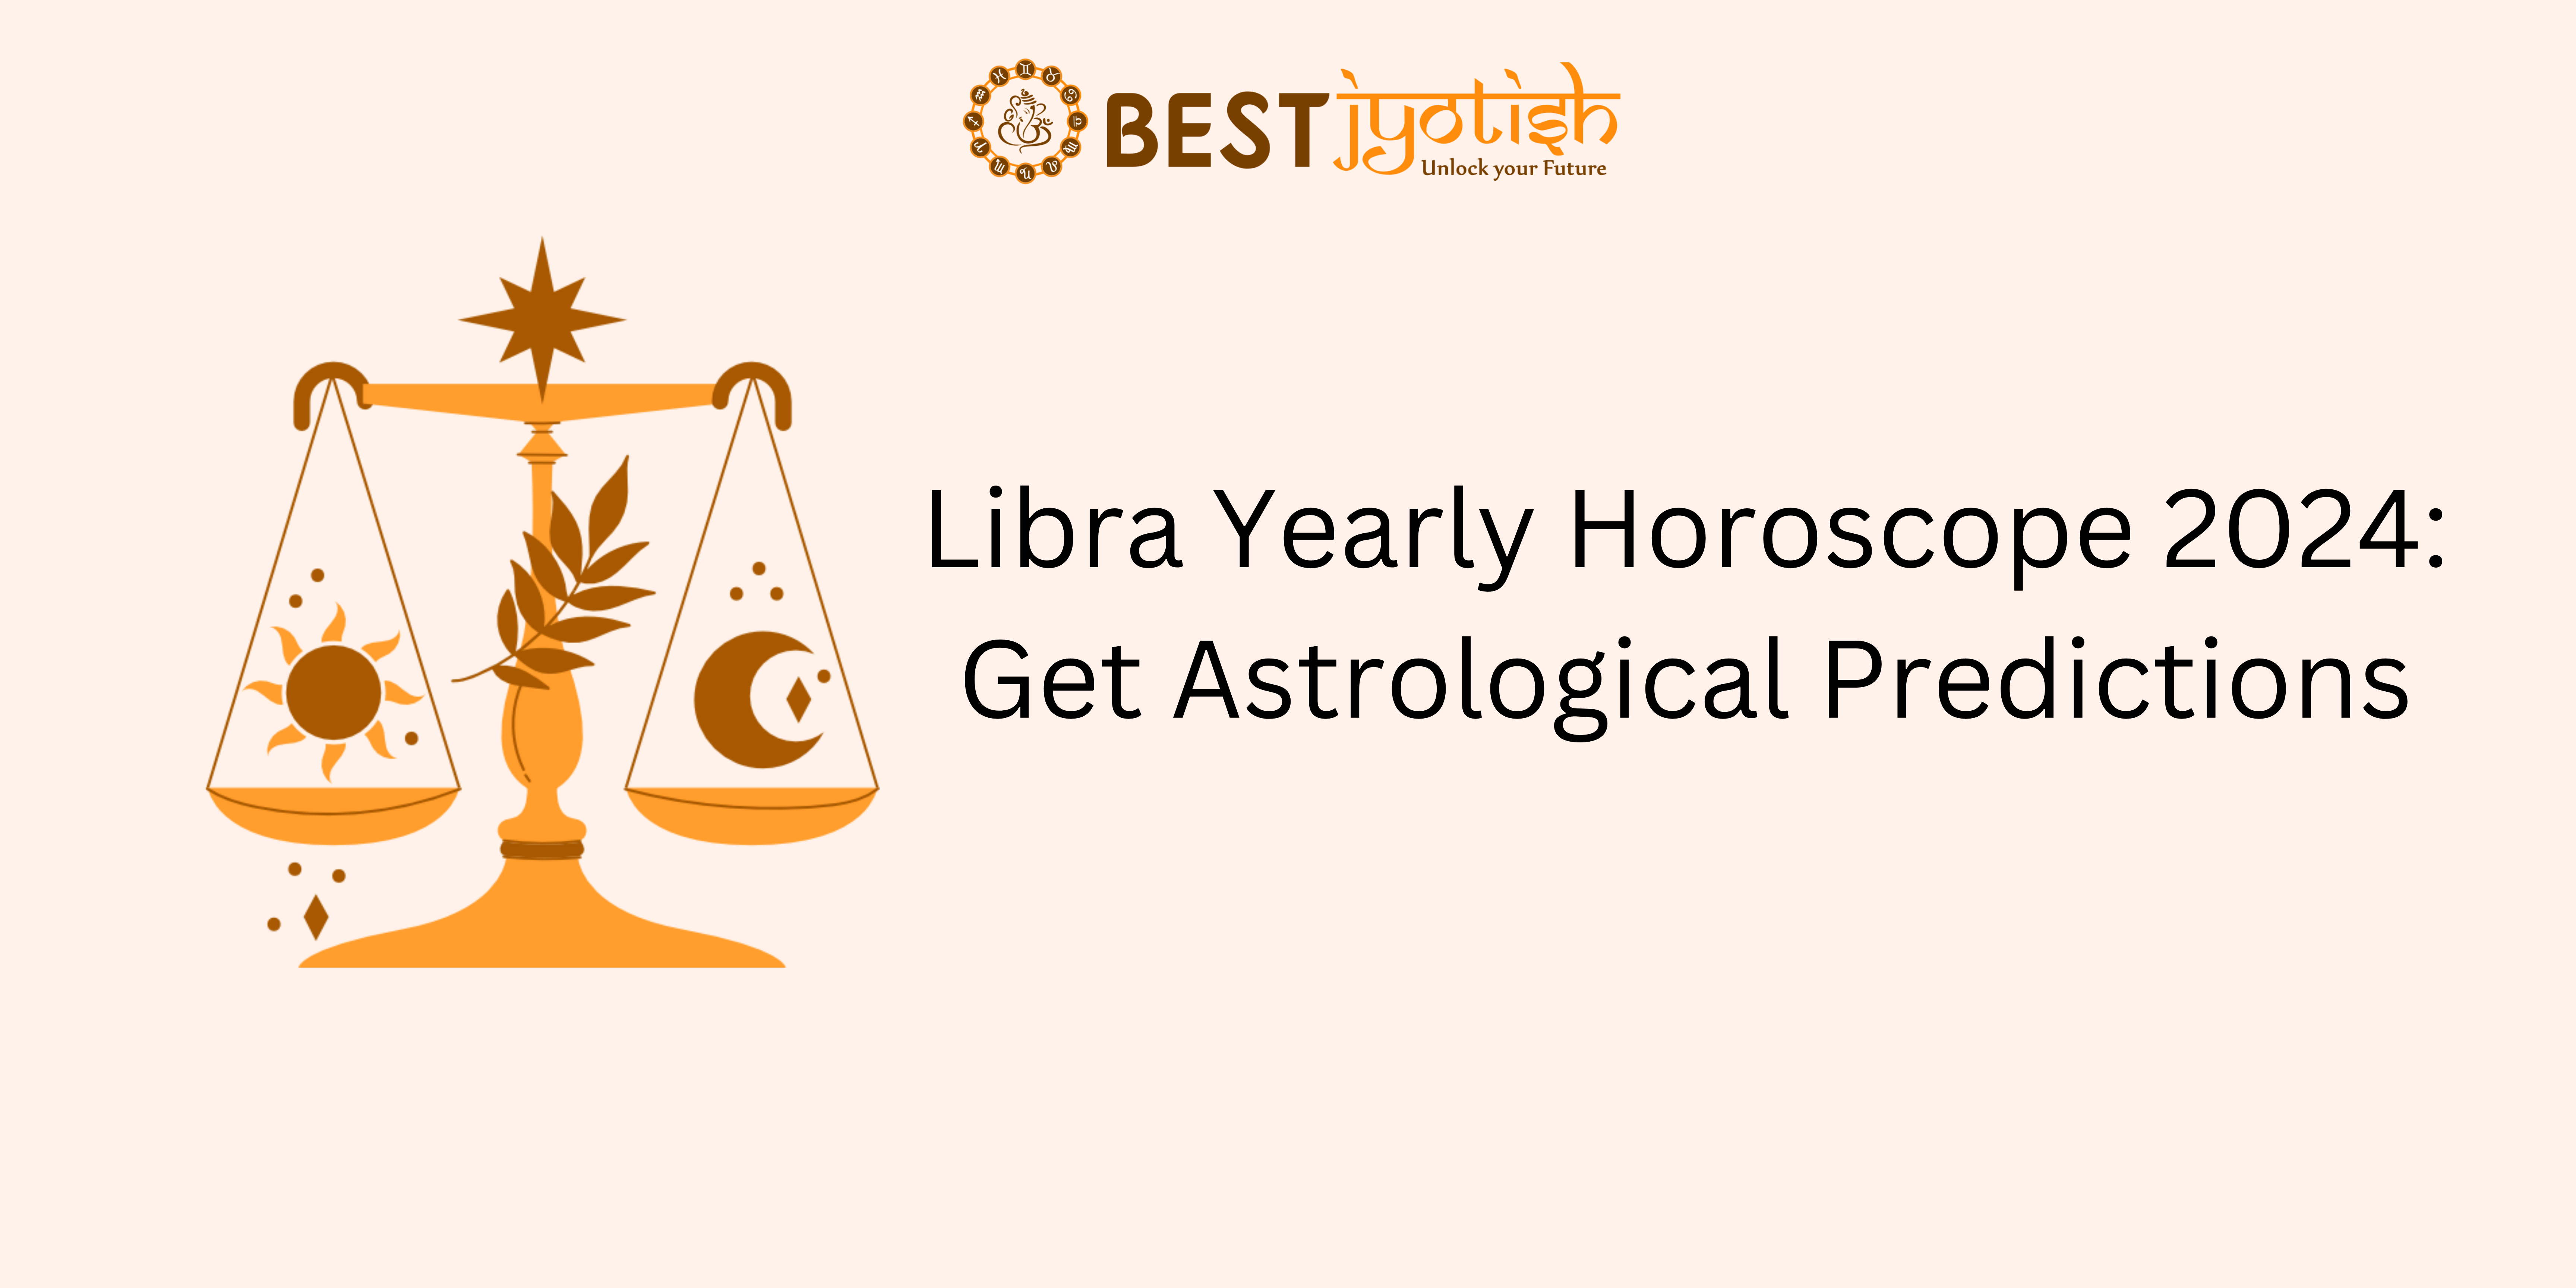 Libra Yearly Horoscope 2024: Get Astrological Predictions